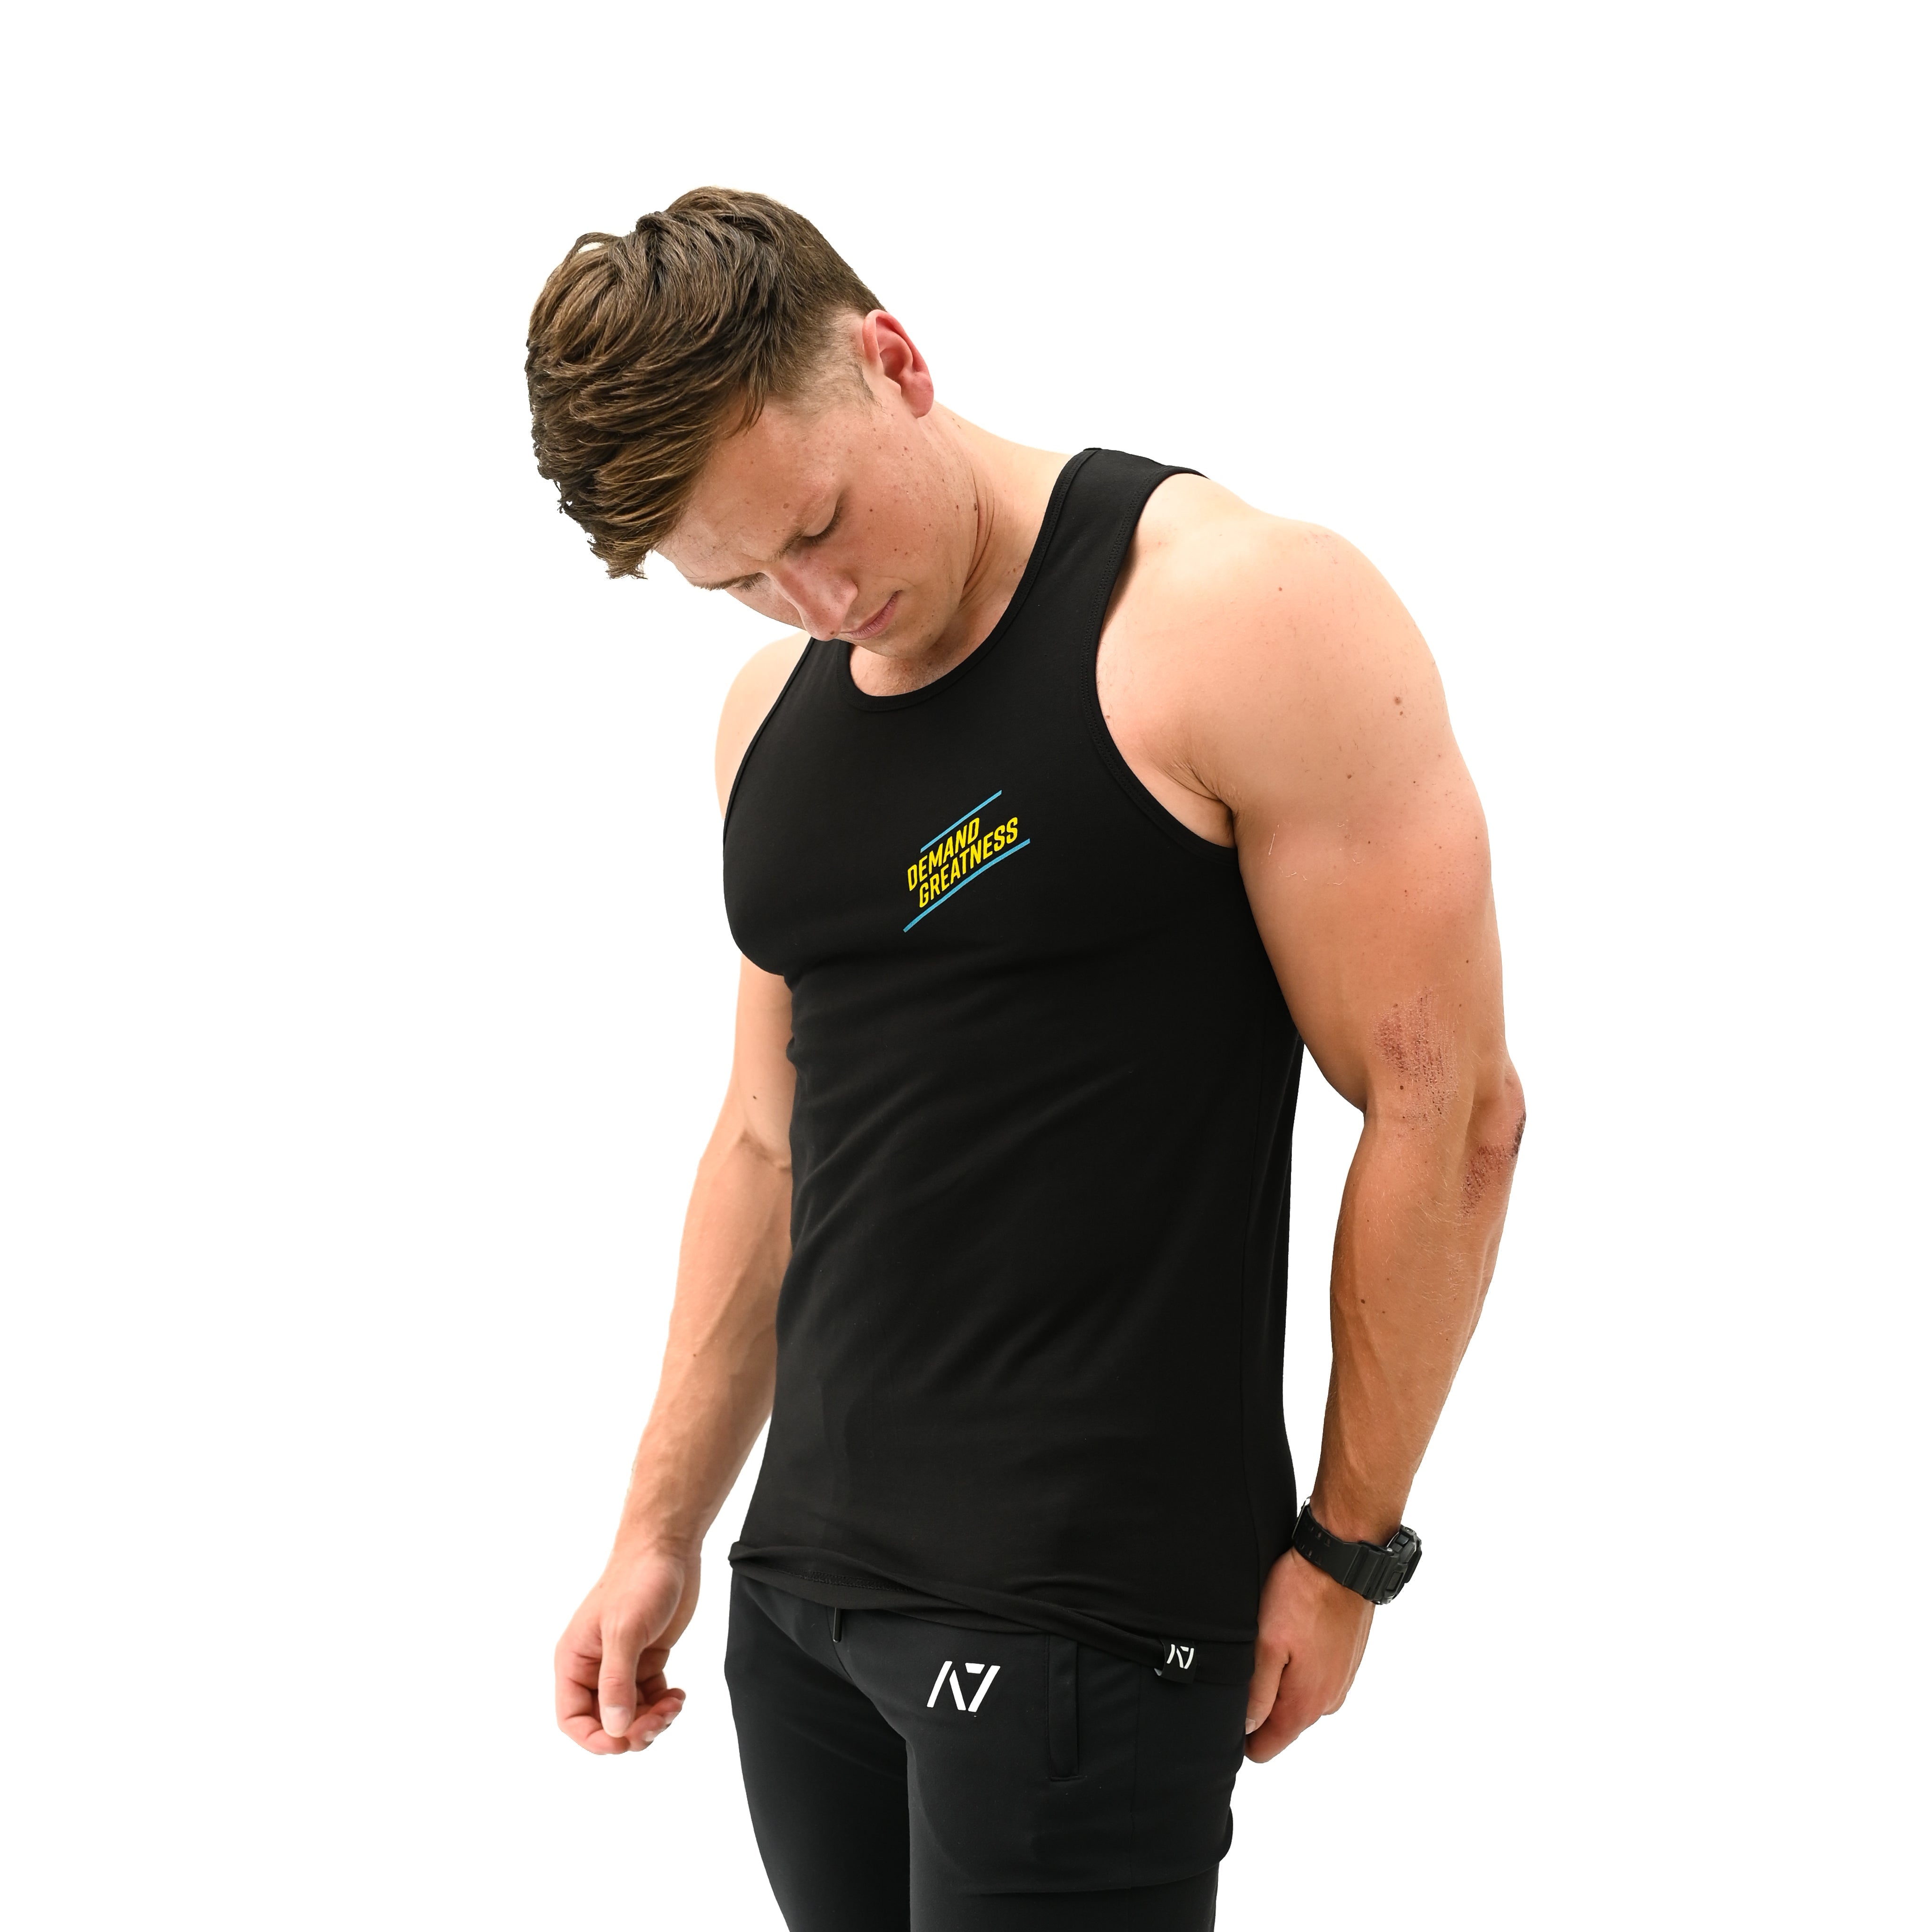 Geo Weave Non Bar Grip Tank T-Shirt is perfect for in and out of the gym. Purchase Geo Weave Non Bar Grip tshirt UK from A7 UK. Purchase Geo Weave Shirt Europe from A7 UK. Best gymwear shipping to UK and Europe from A7 UK. Geo Weave is our newest Non Bar Grip Design. The best Powerlifting apparel for all your workouts. Available in UK and Europe including France, Italy, Germany, Sweden and Poland.